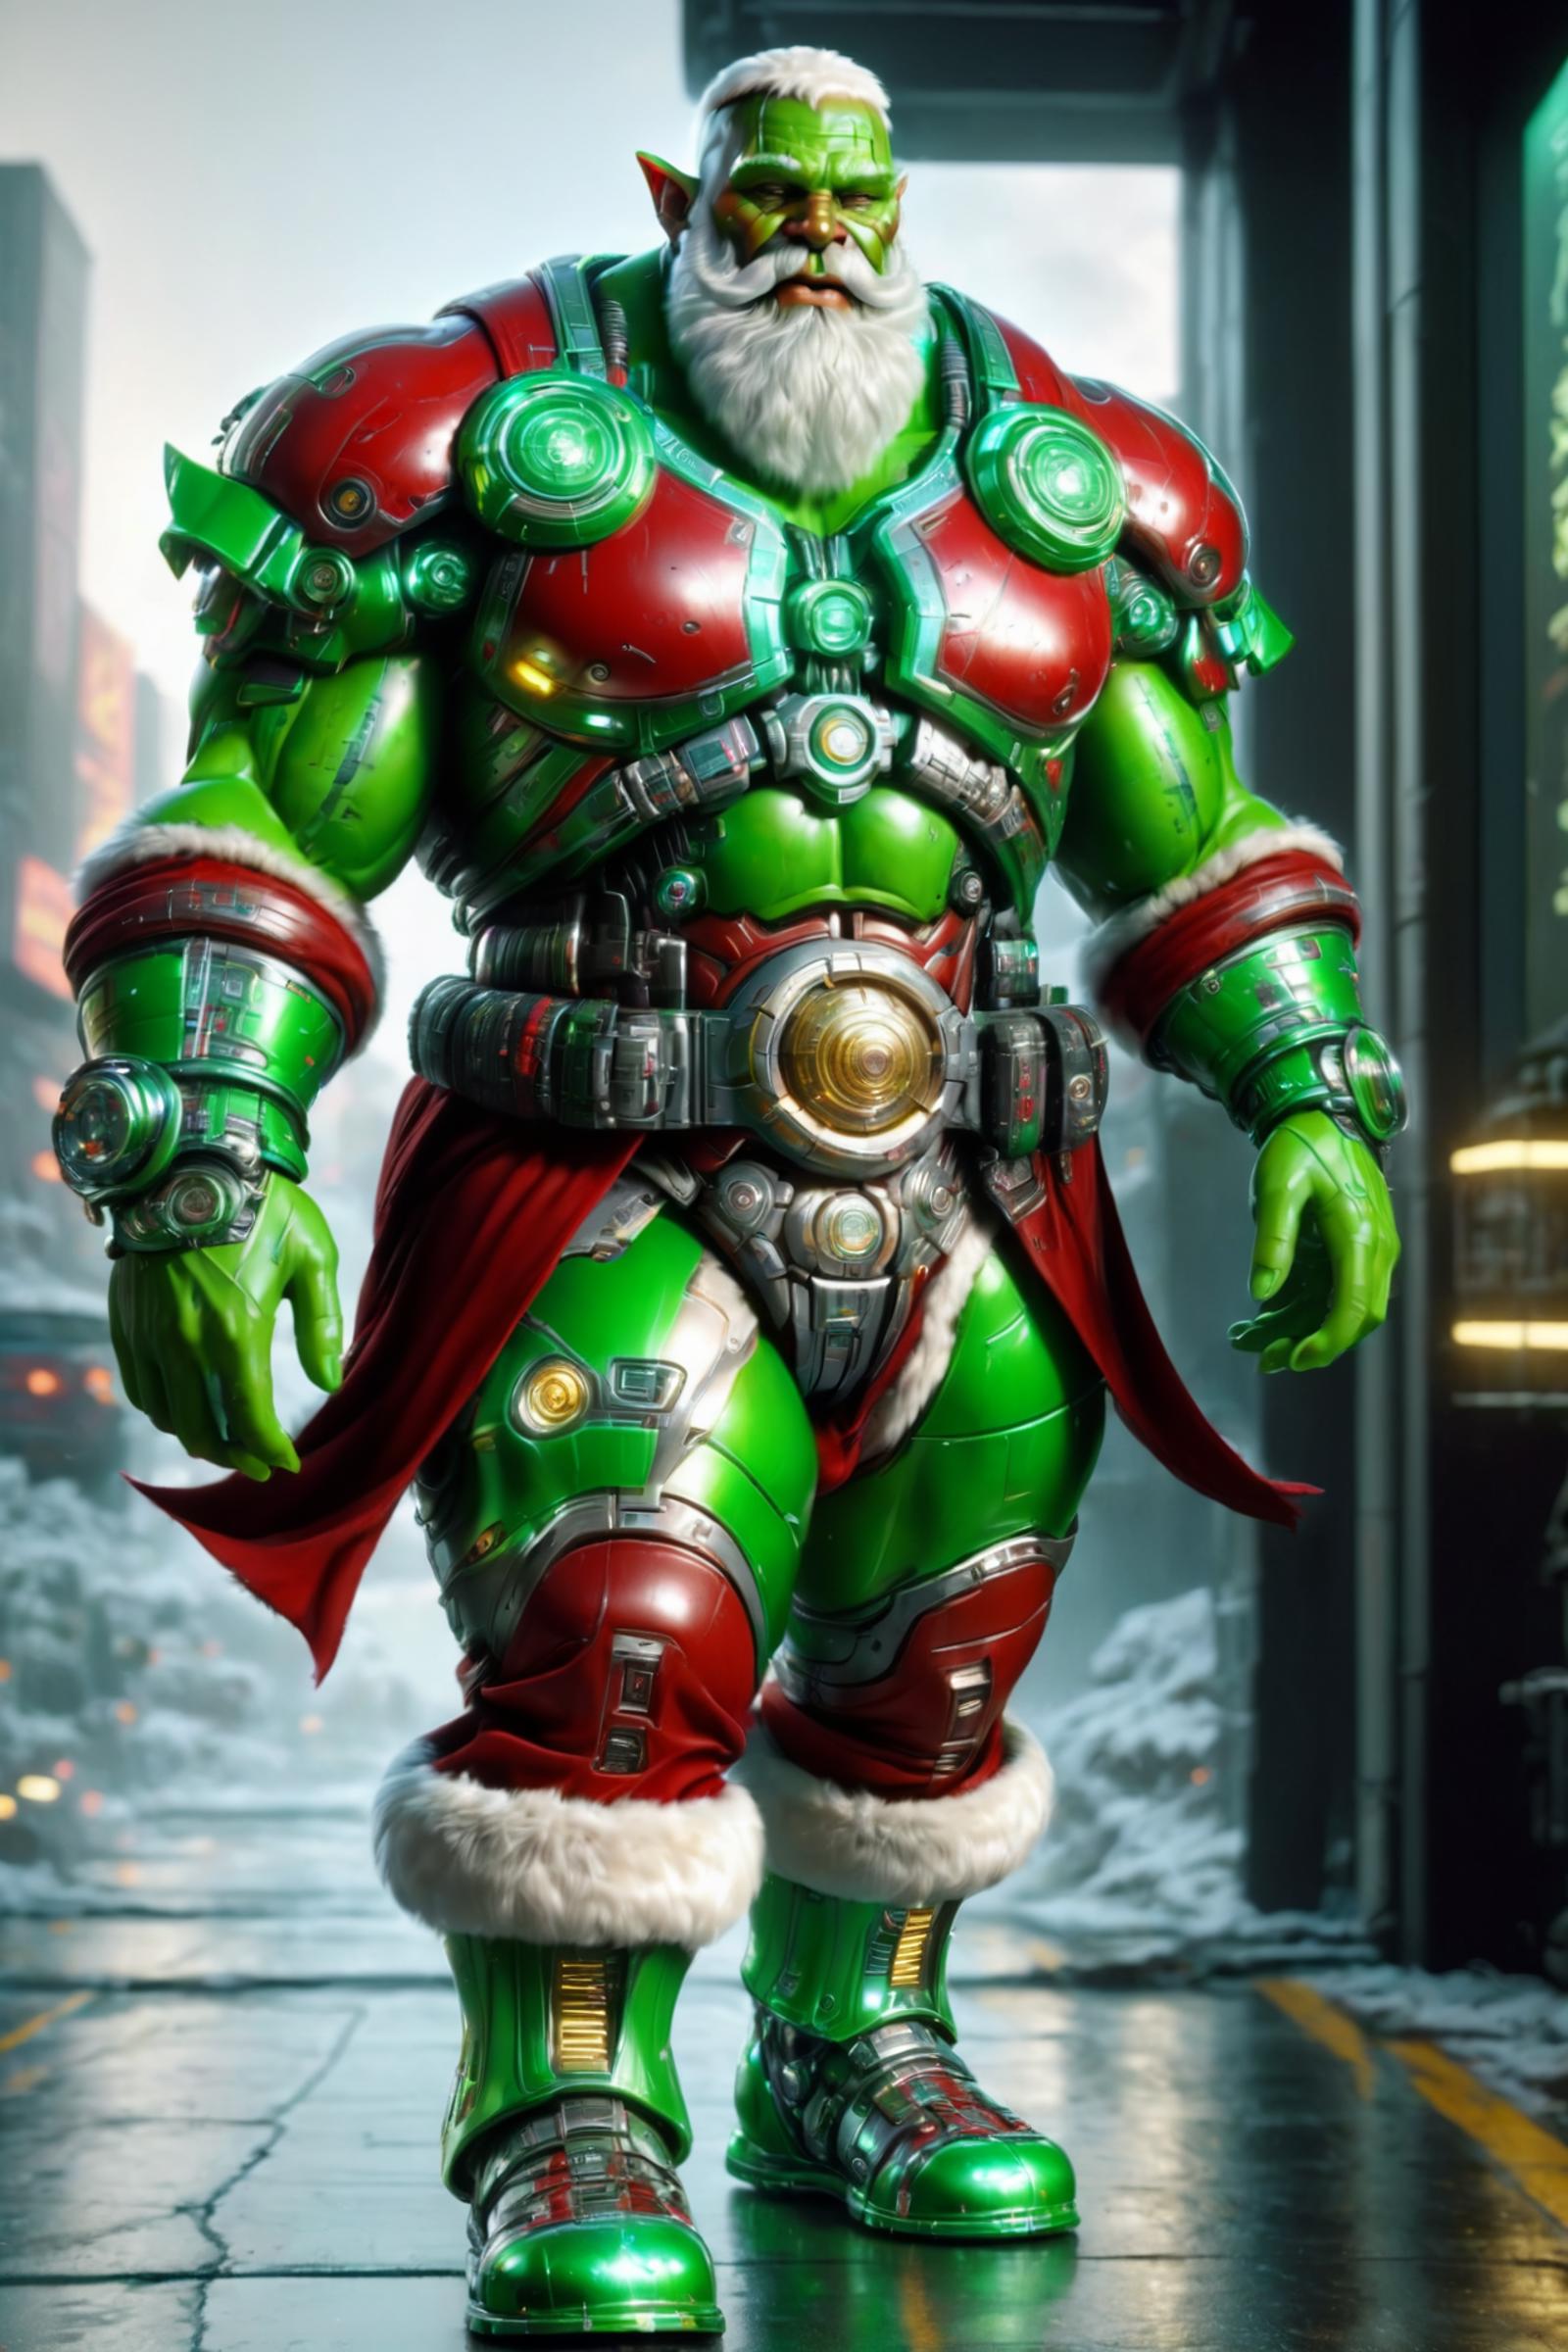 A Christmas-themed robot figure with green and red colors and a belt.